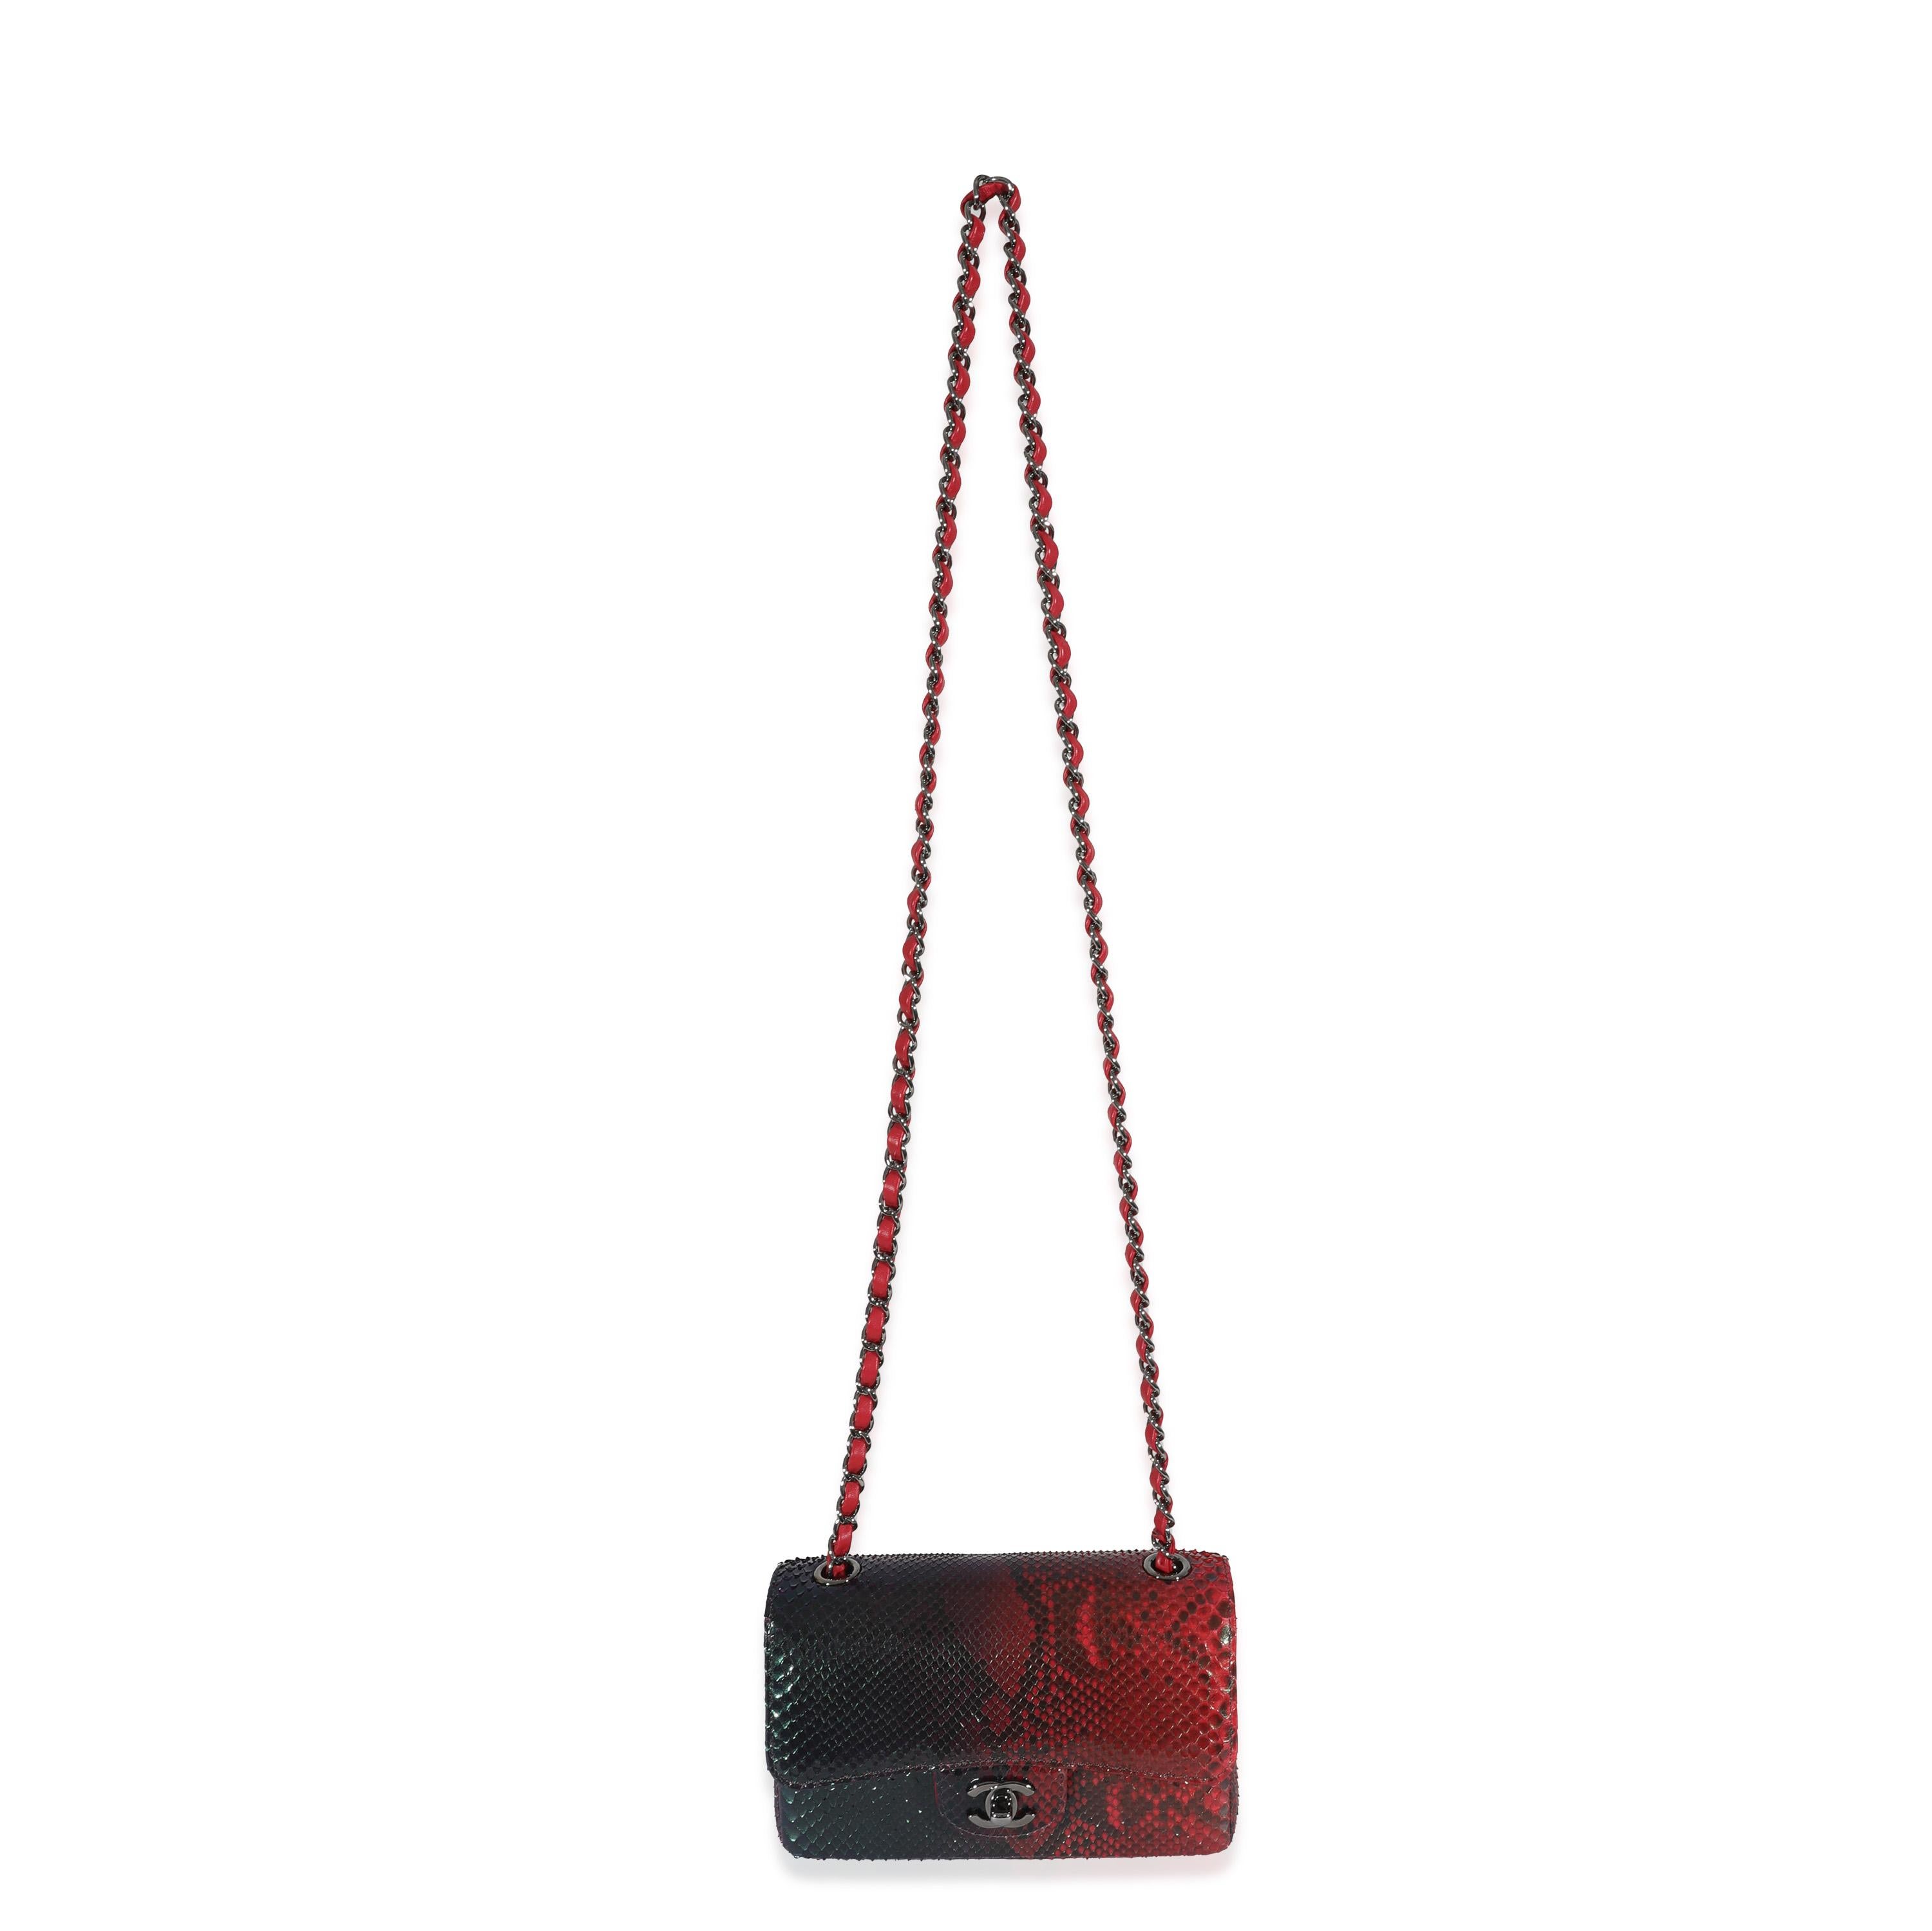 Listing Title: Chanel 18K Red Black Ombre Iridescent Python Mini Flap Bag RHW
SKU: 130775
MSRP: 6100.00
Condition: Pre-owned 
Condition Description: A timeless classic that never goes out of style, the flap bag from Chanel dates back to 1955 and has